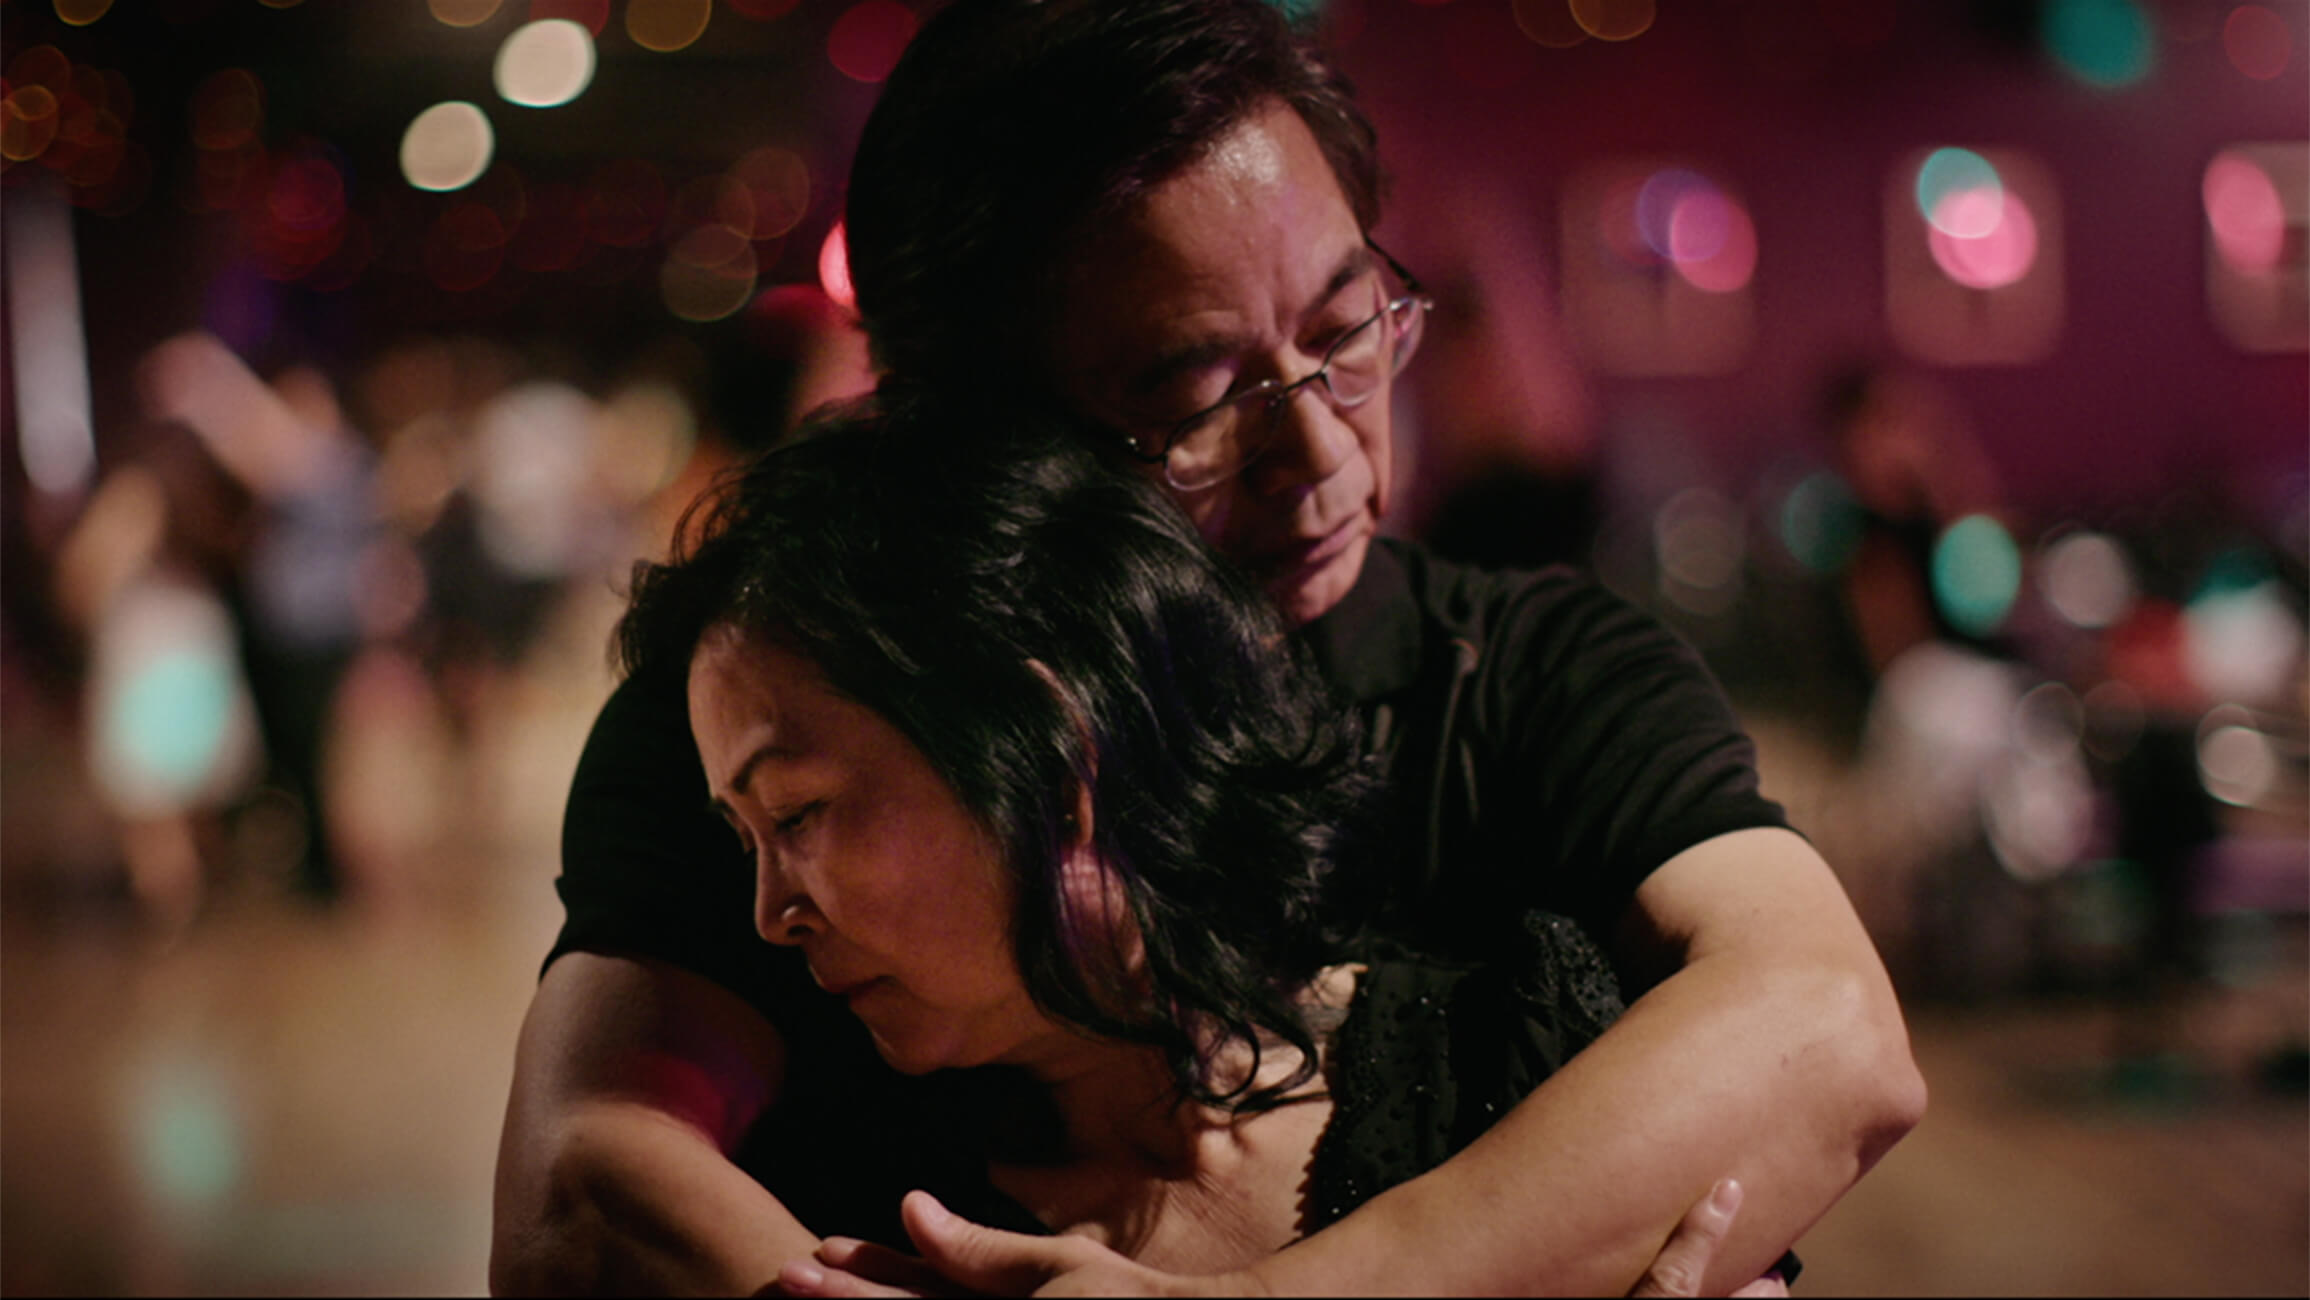 Middle aged Asian man wearing glasses embraces middle aged Asian woman.